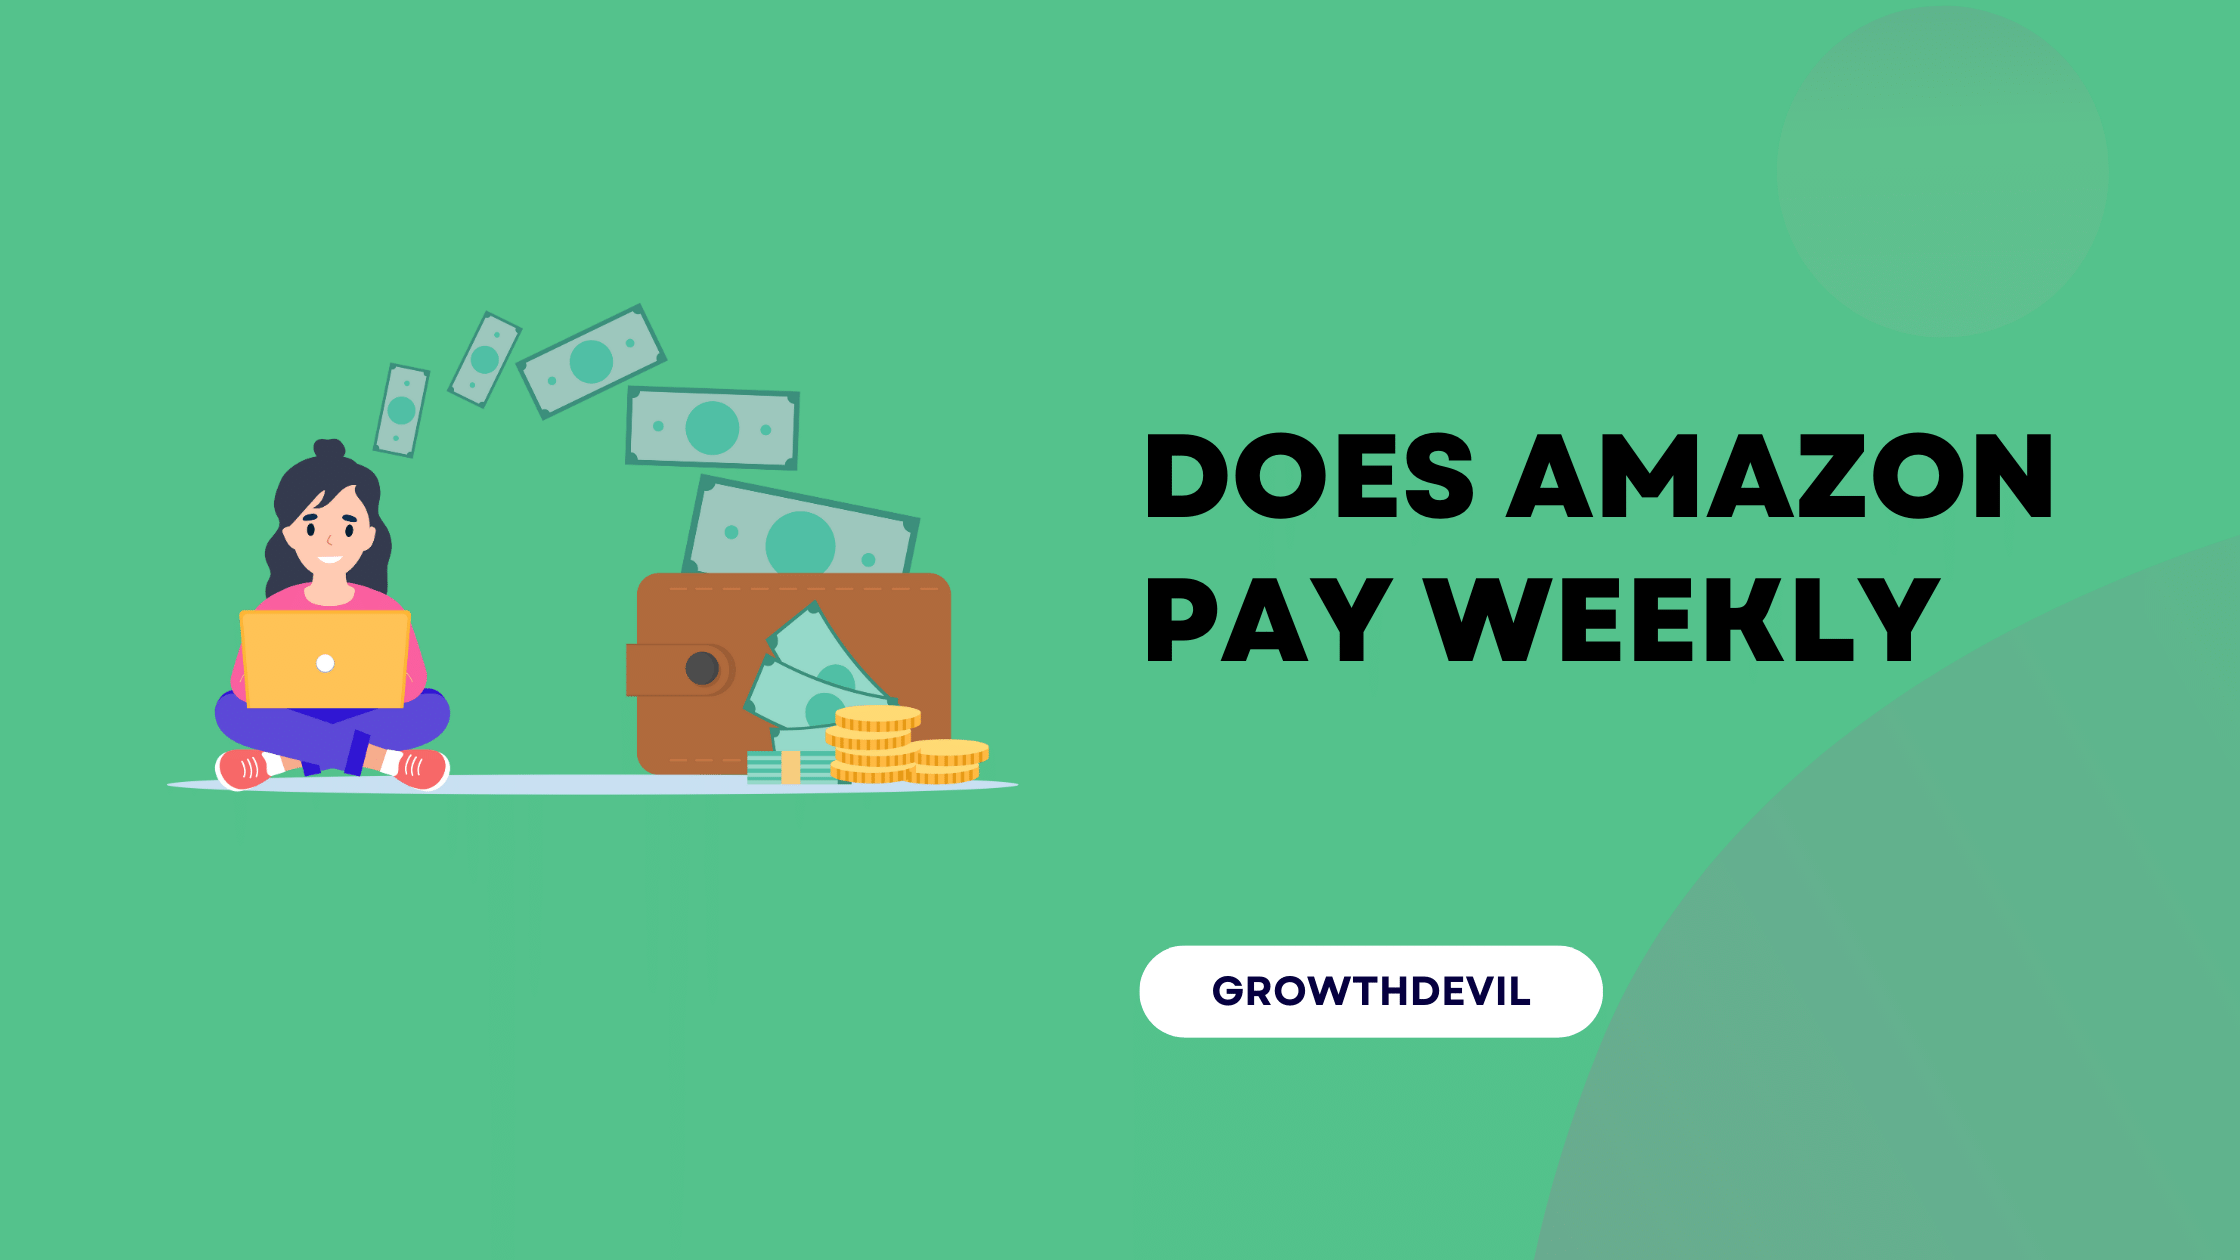 Does Amazon Pay Weekly - GrowthDevil